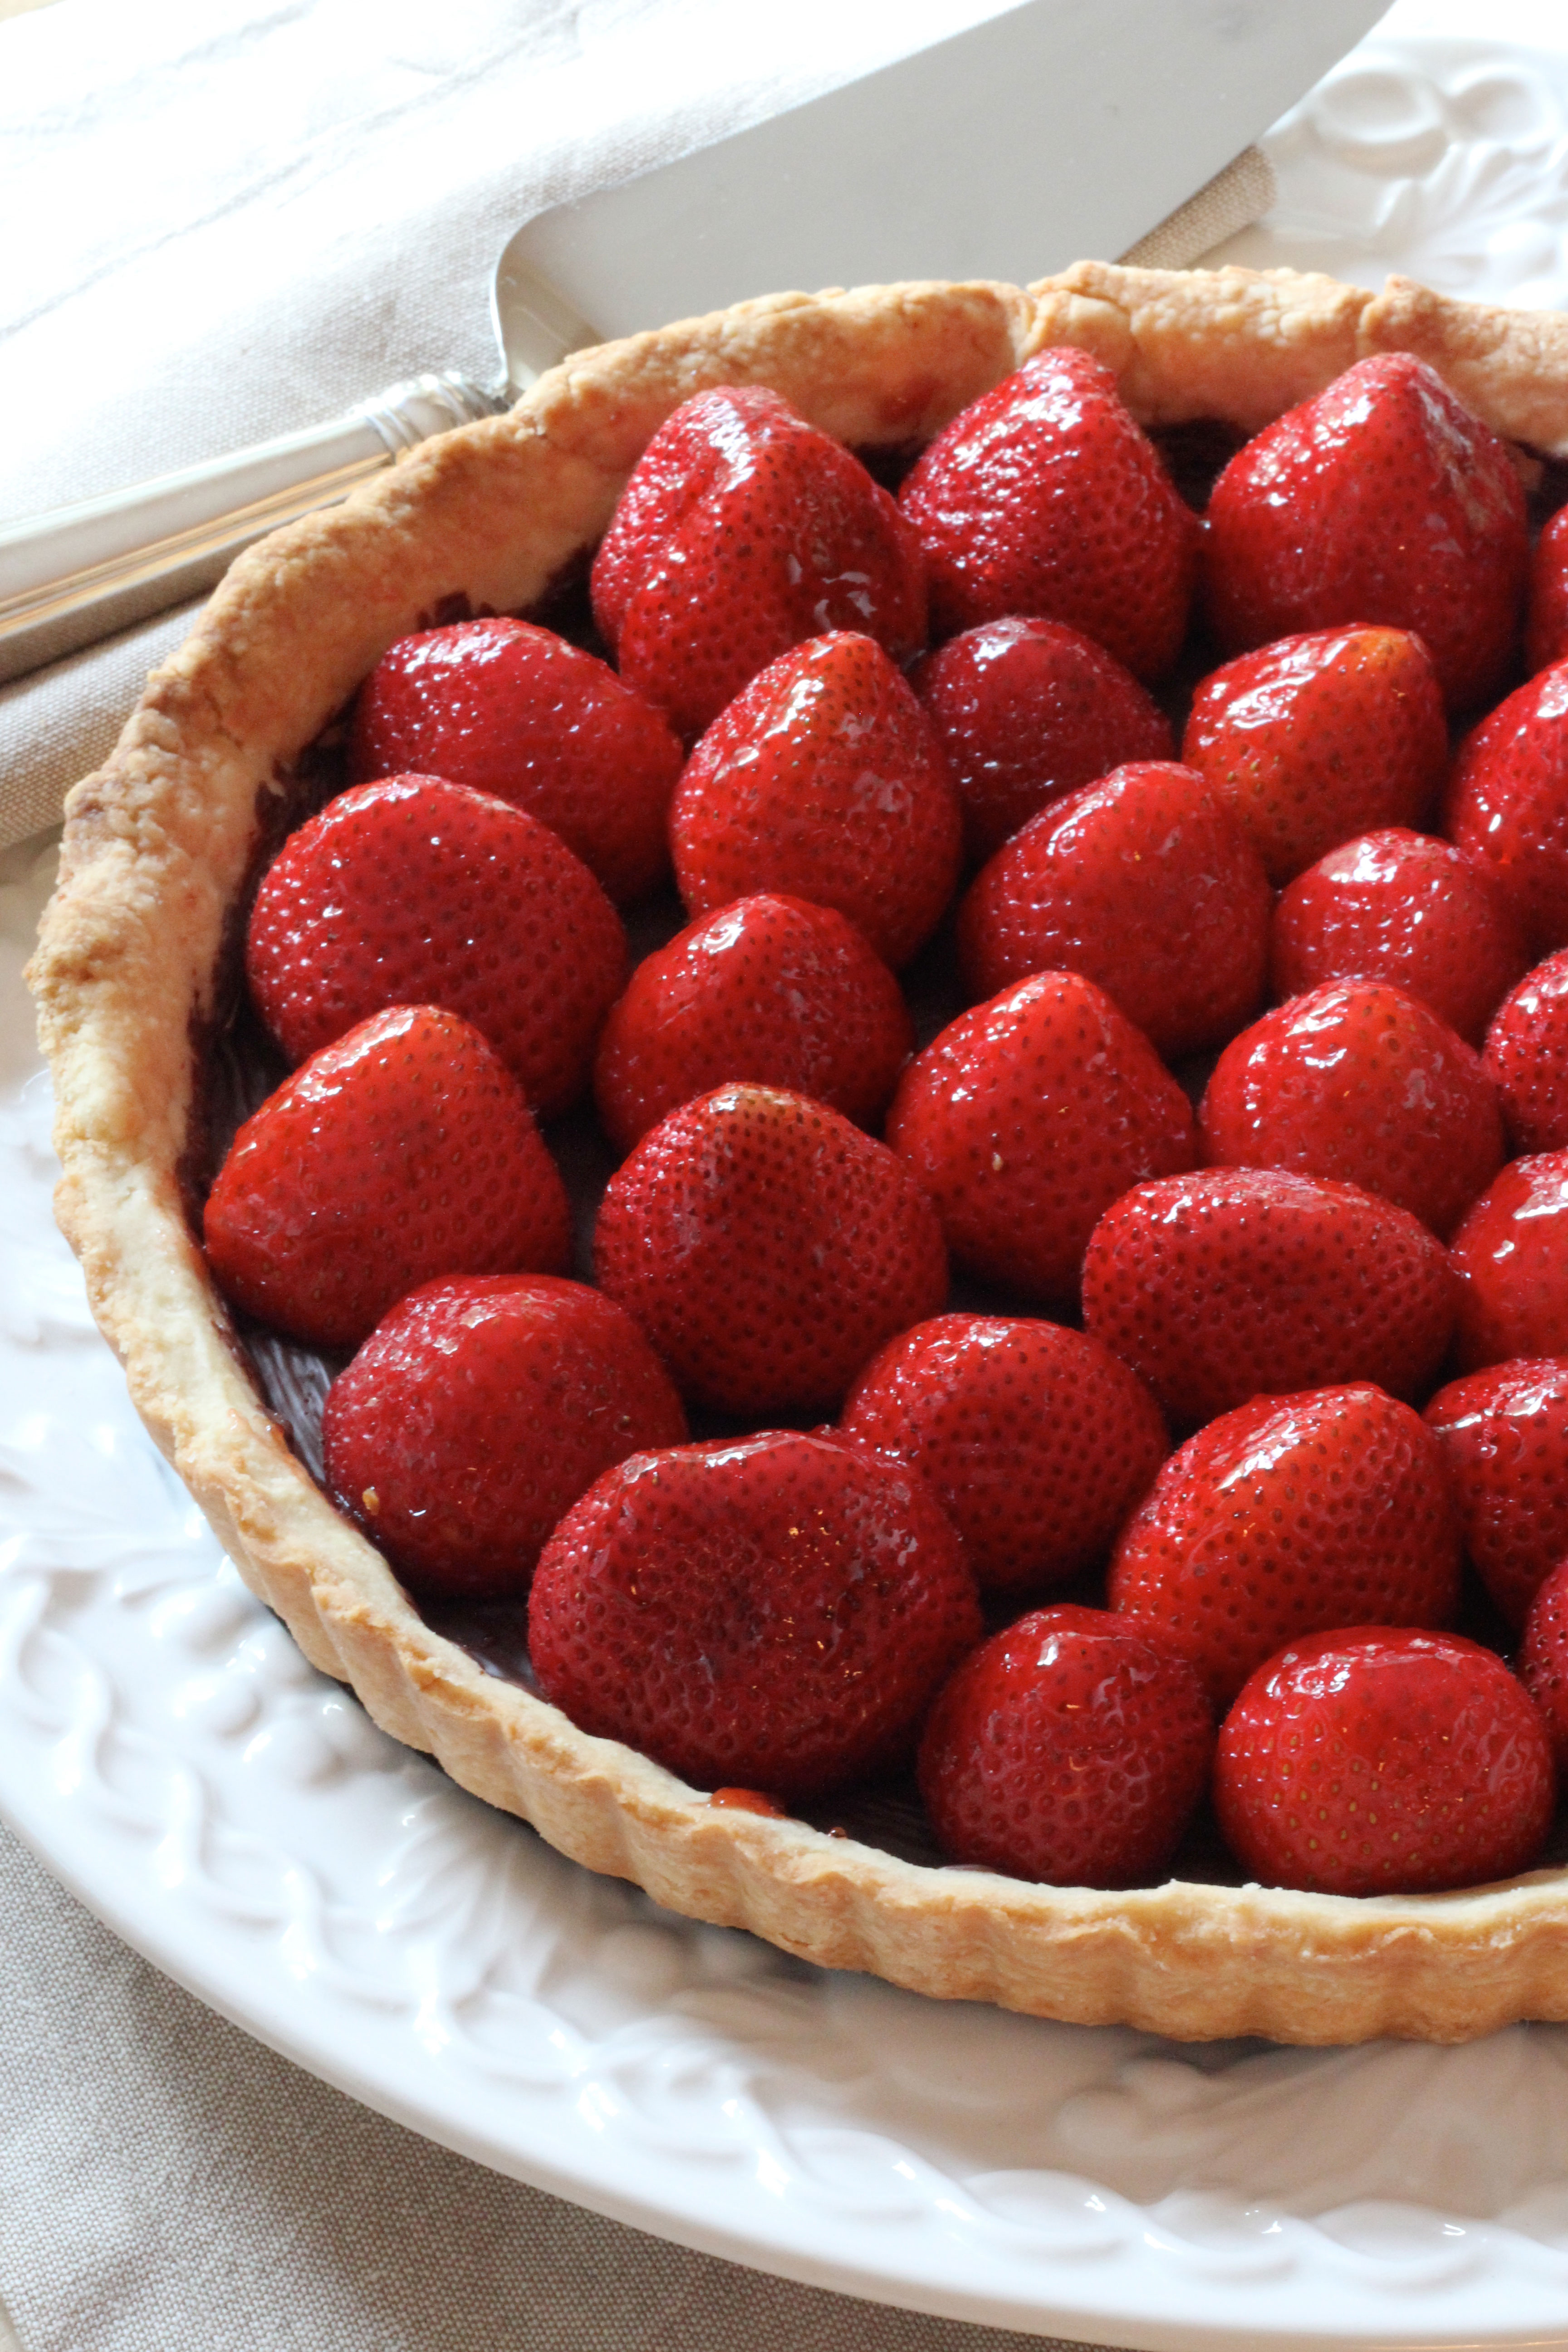 Fresh Strawberries, a light Pâte Sucrée dough with a hint of chocolate and you have a super Summer dessert! Make this Strawberry Tart and WOW your guests!